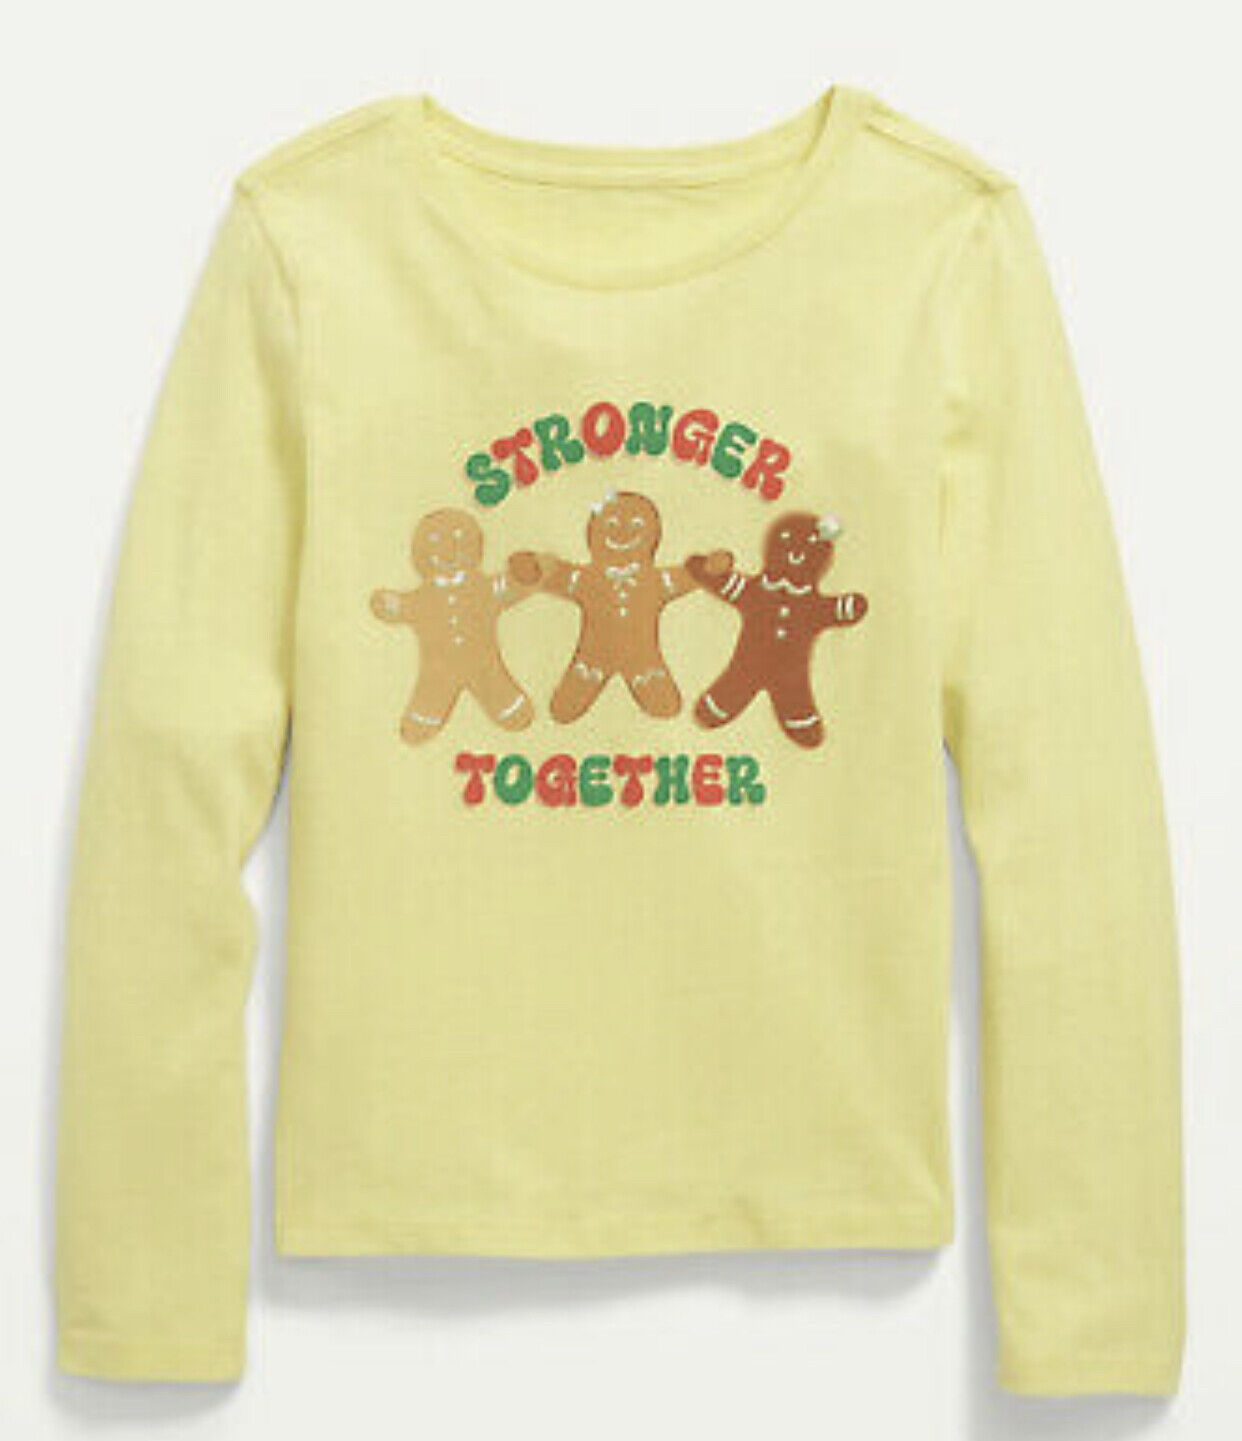 Old Navy Kids Size Small (6-7) Long Sleeve Tee T-shirt  .. Nwt Gingerbread